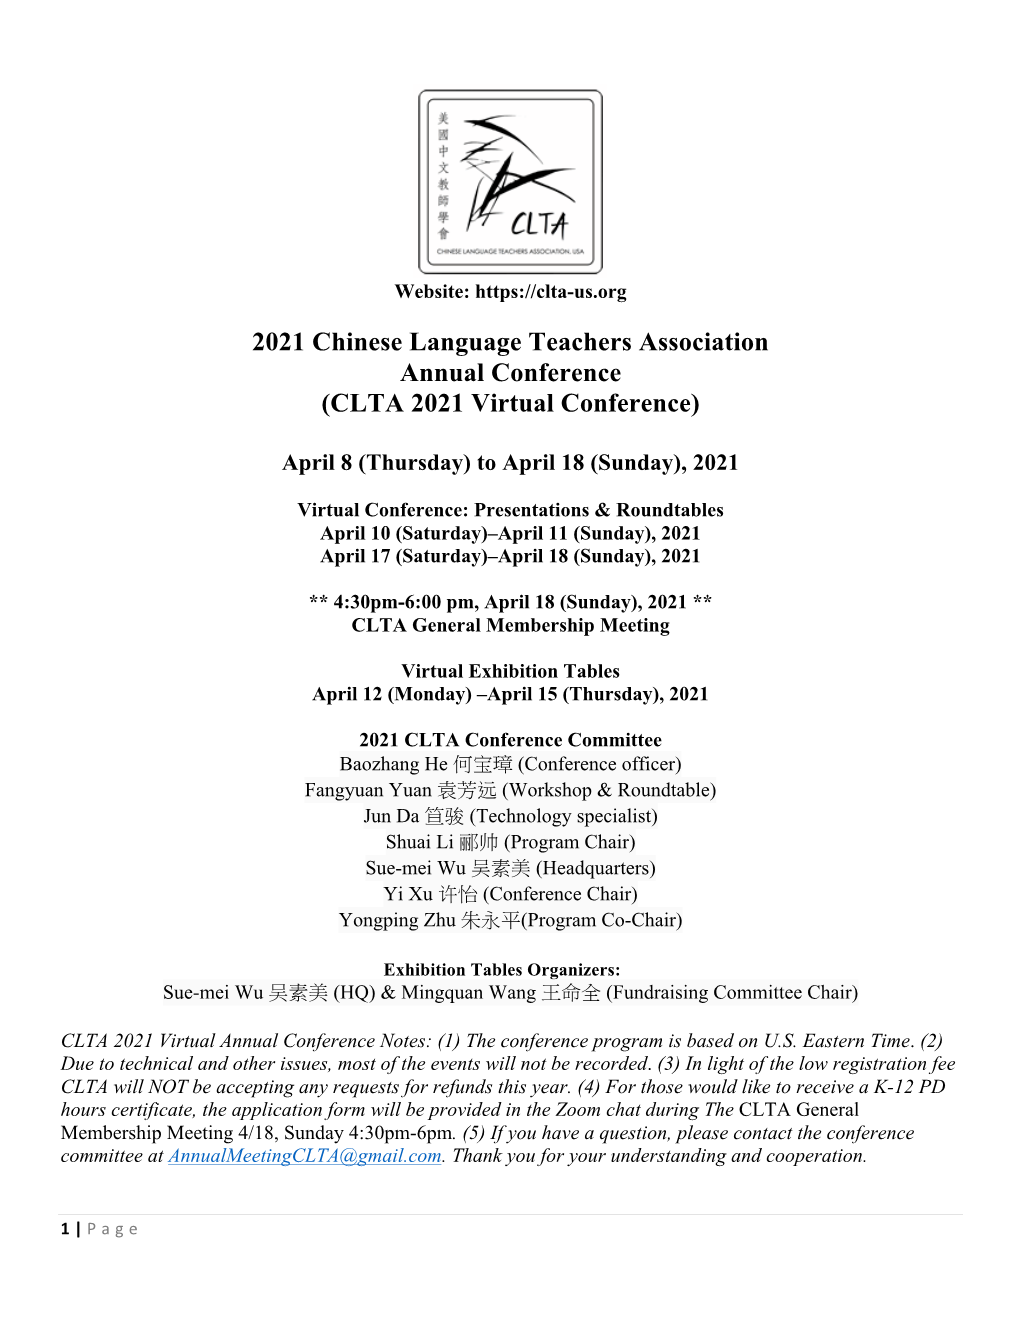 2021 Chinese Language Teachers Association Annual Conference (CLTA 2021 Virtual Conference)